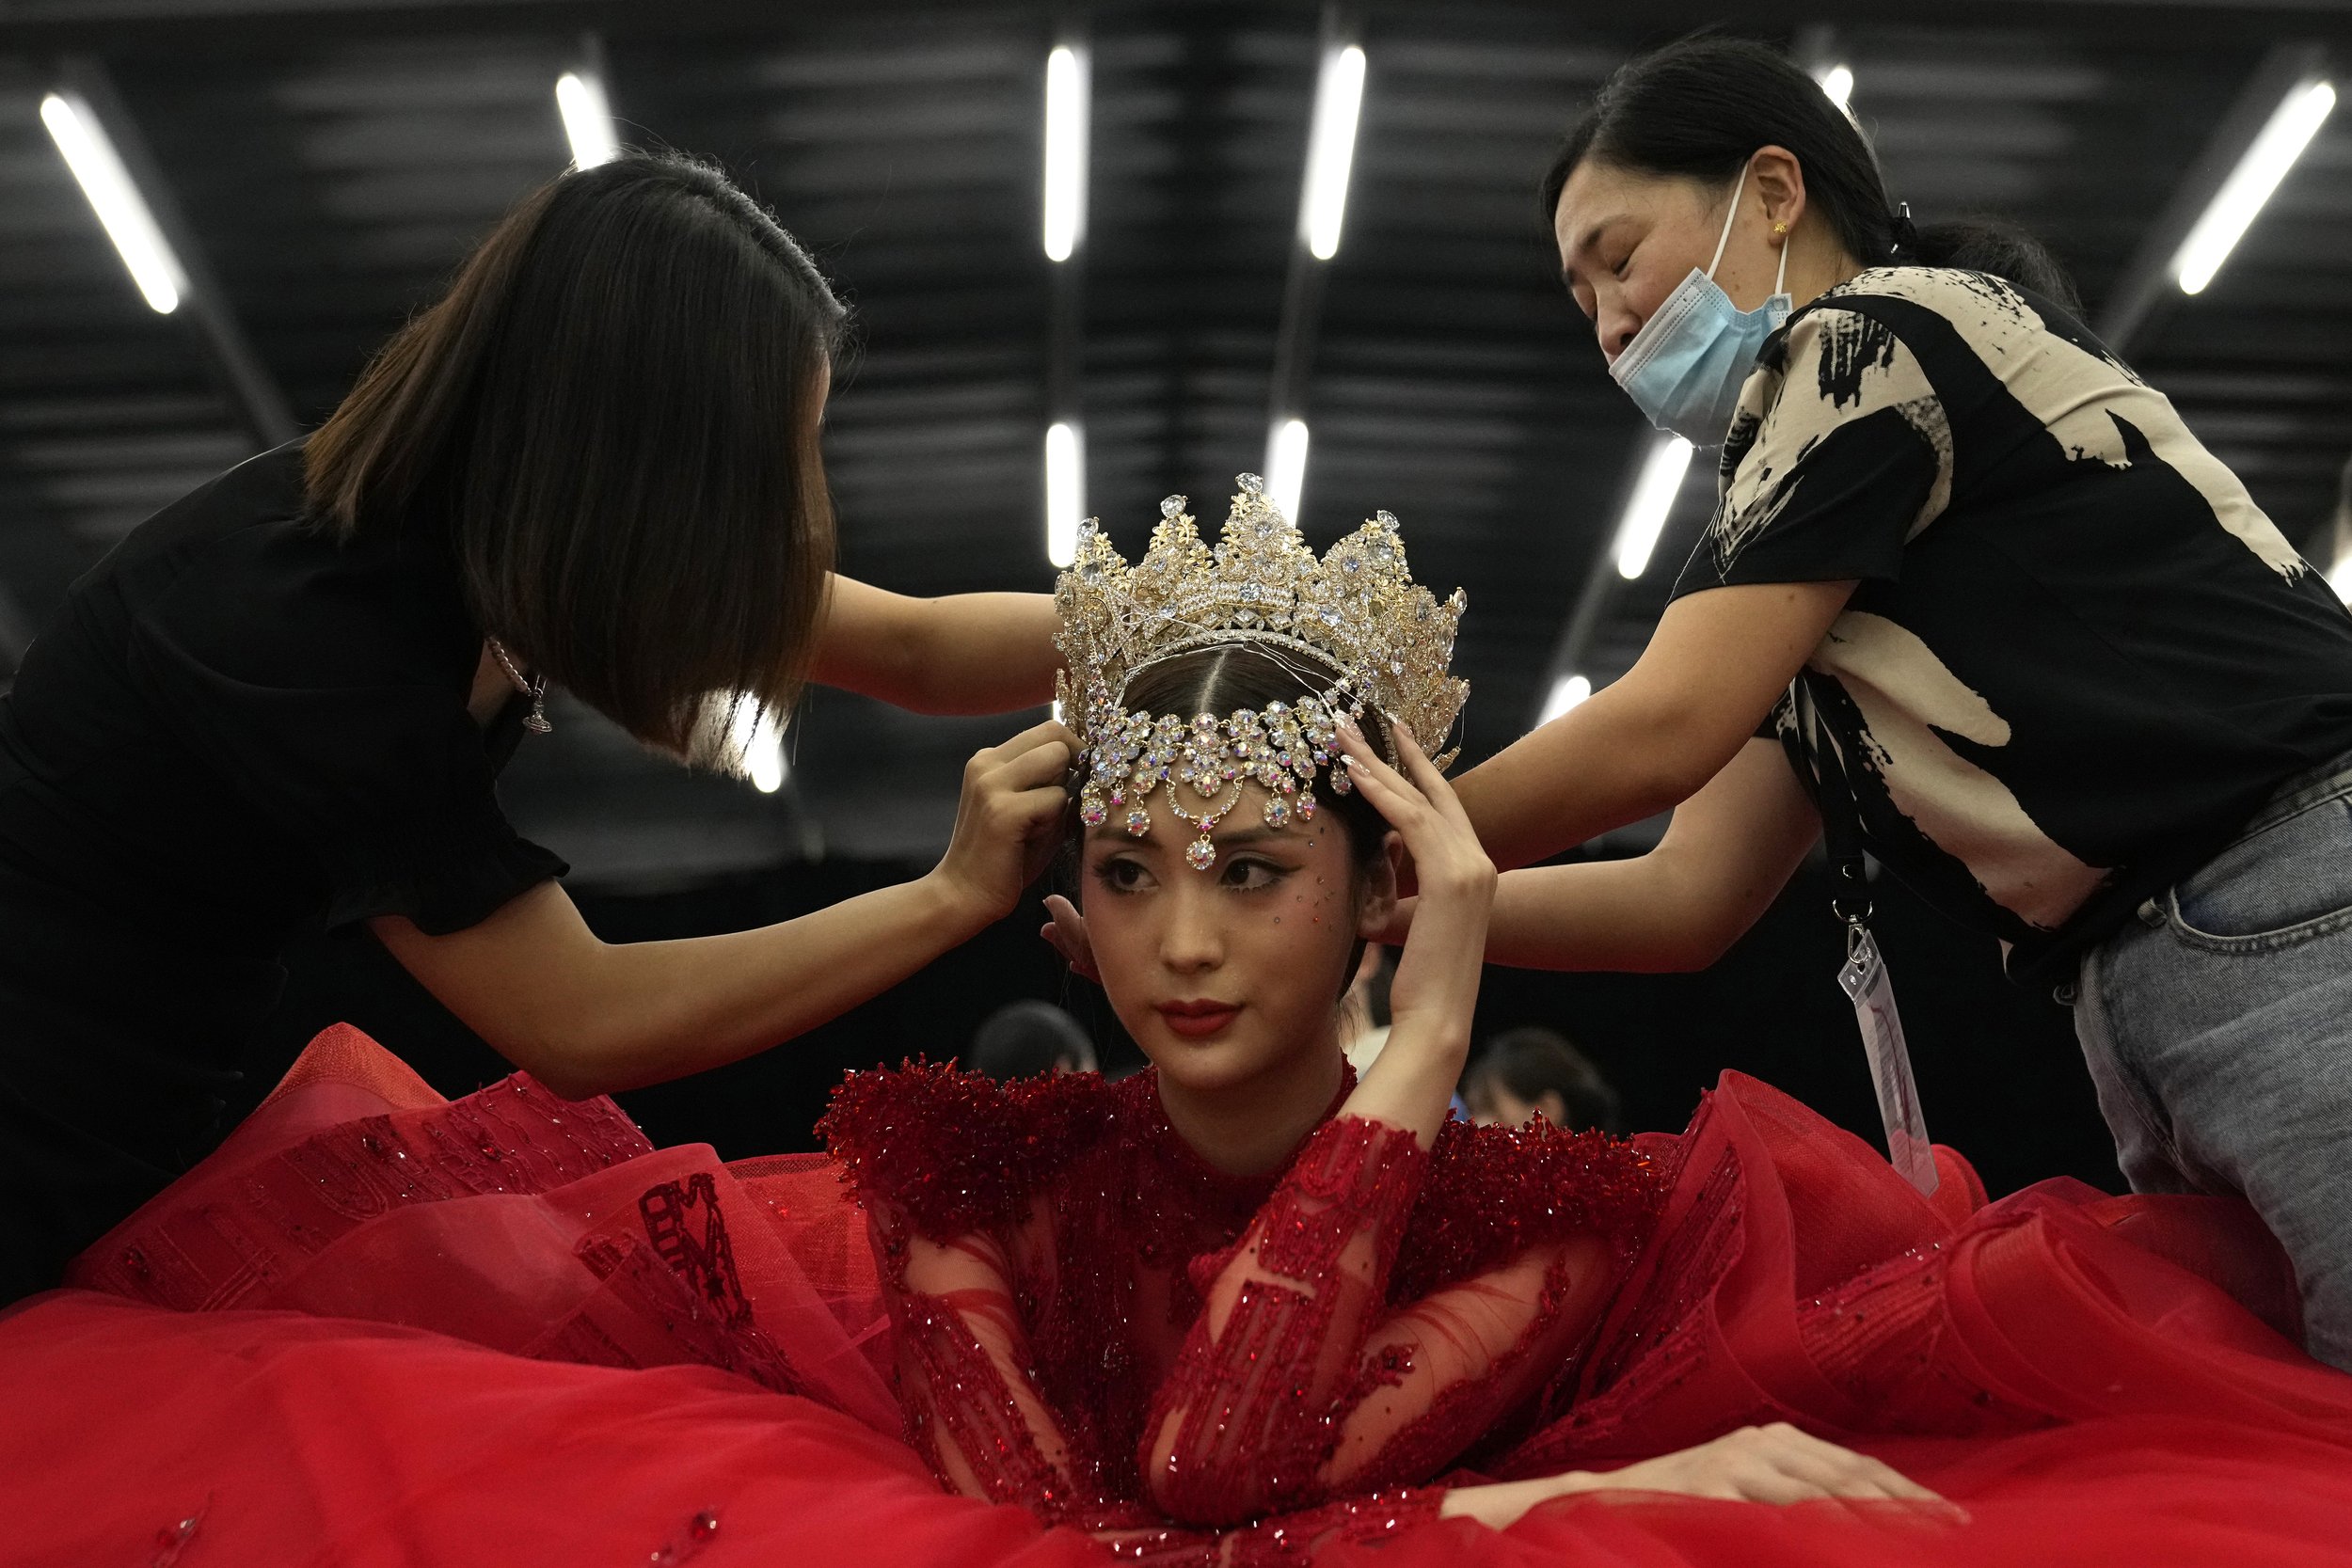  A model waits to have her headdress removed after a presentation of the William Zhang collection by designer Hongwei Zhang during the China Fashion Week in Beijing, on Sept. 8, 2021. (AP Photo/Ng Han Guan) 